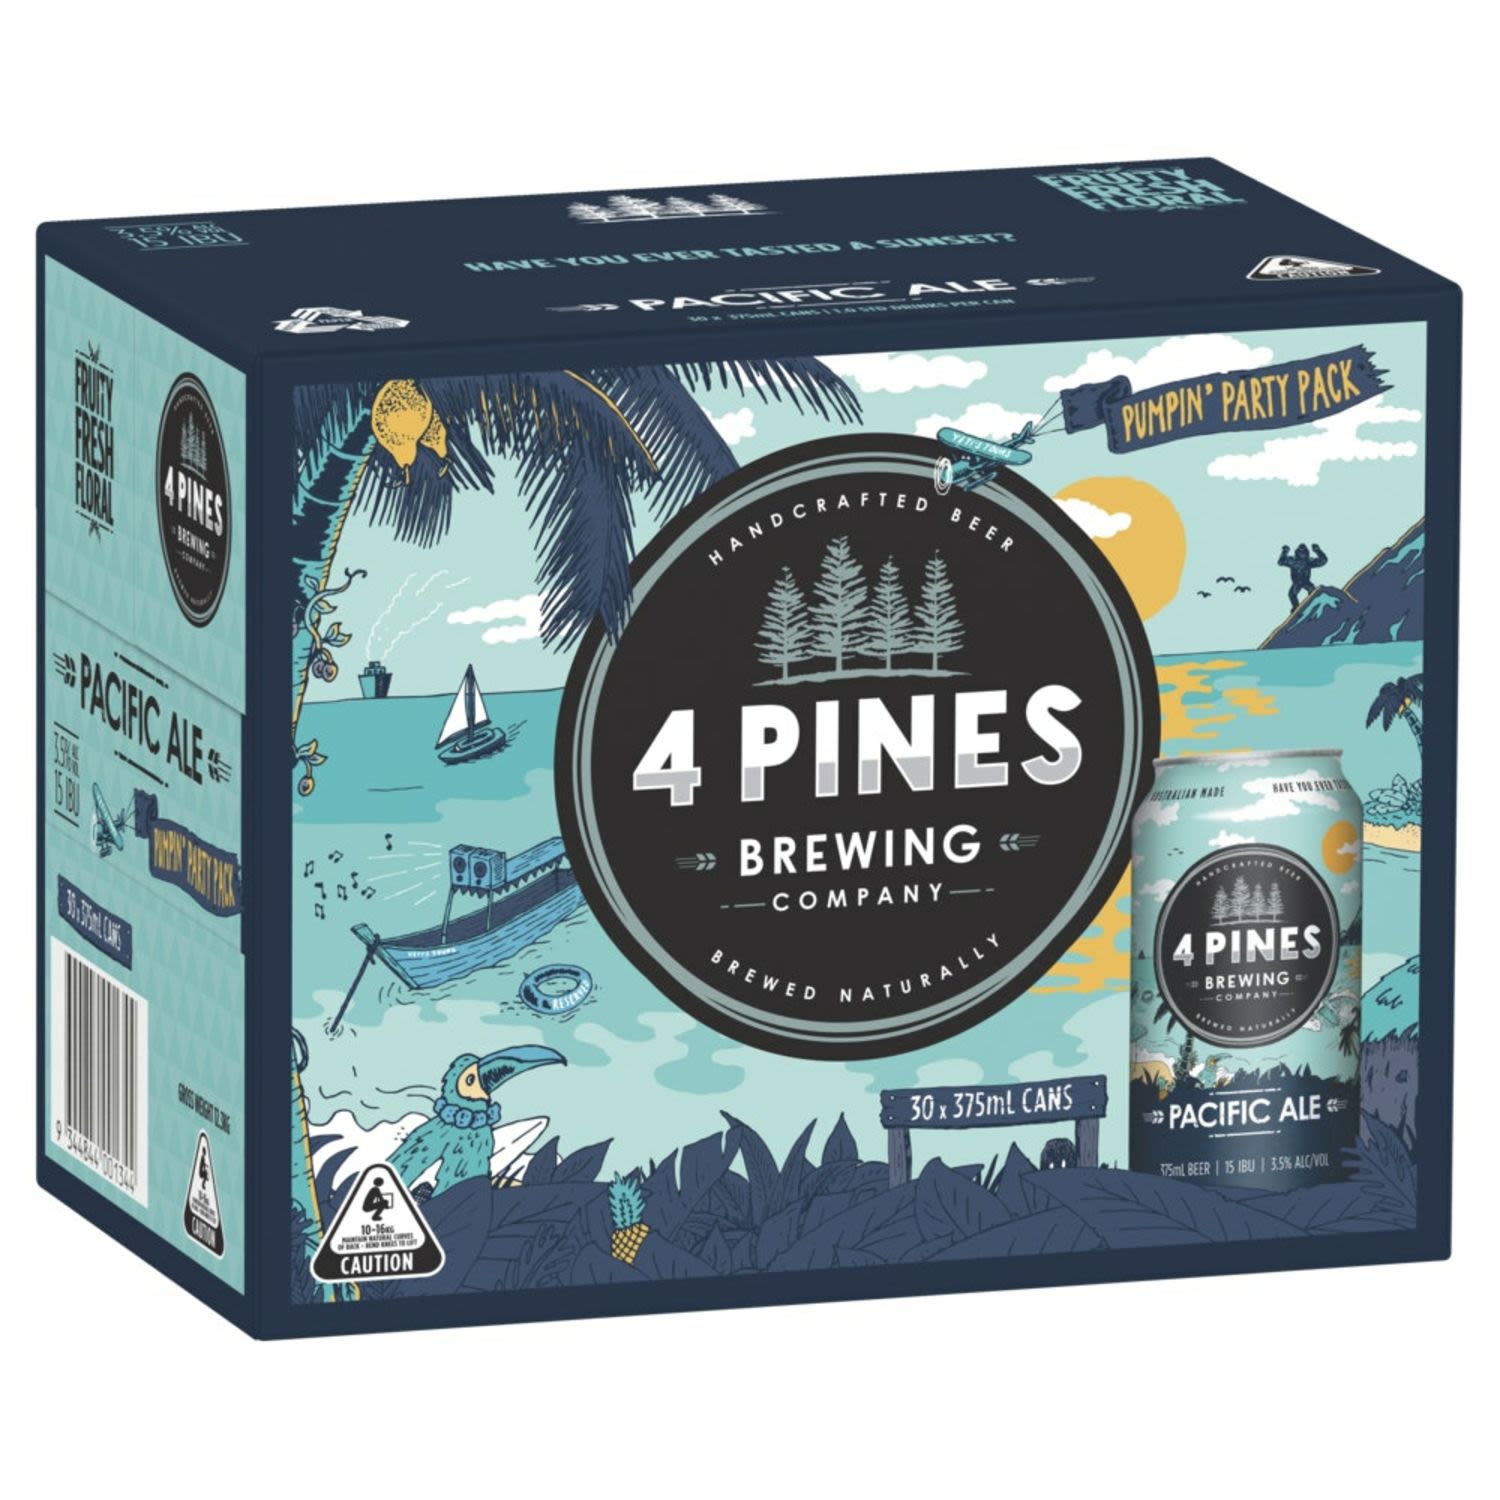 4 Pines Pacific Ale Can 375mL 30 Pack